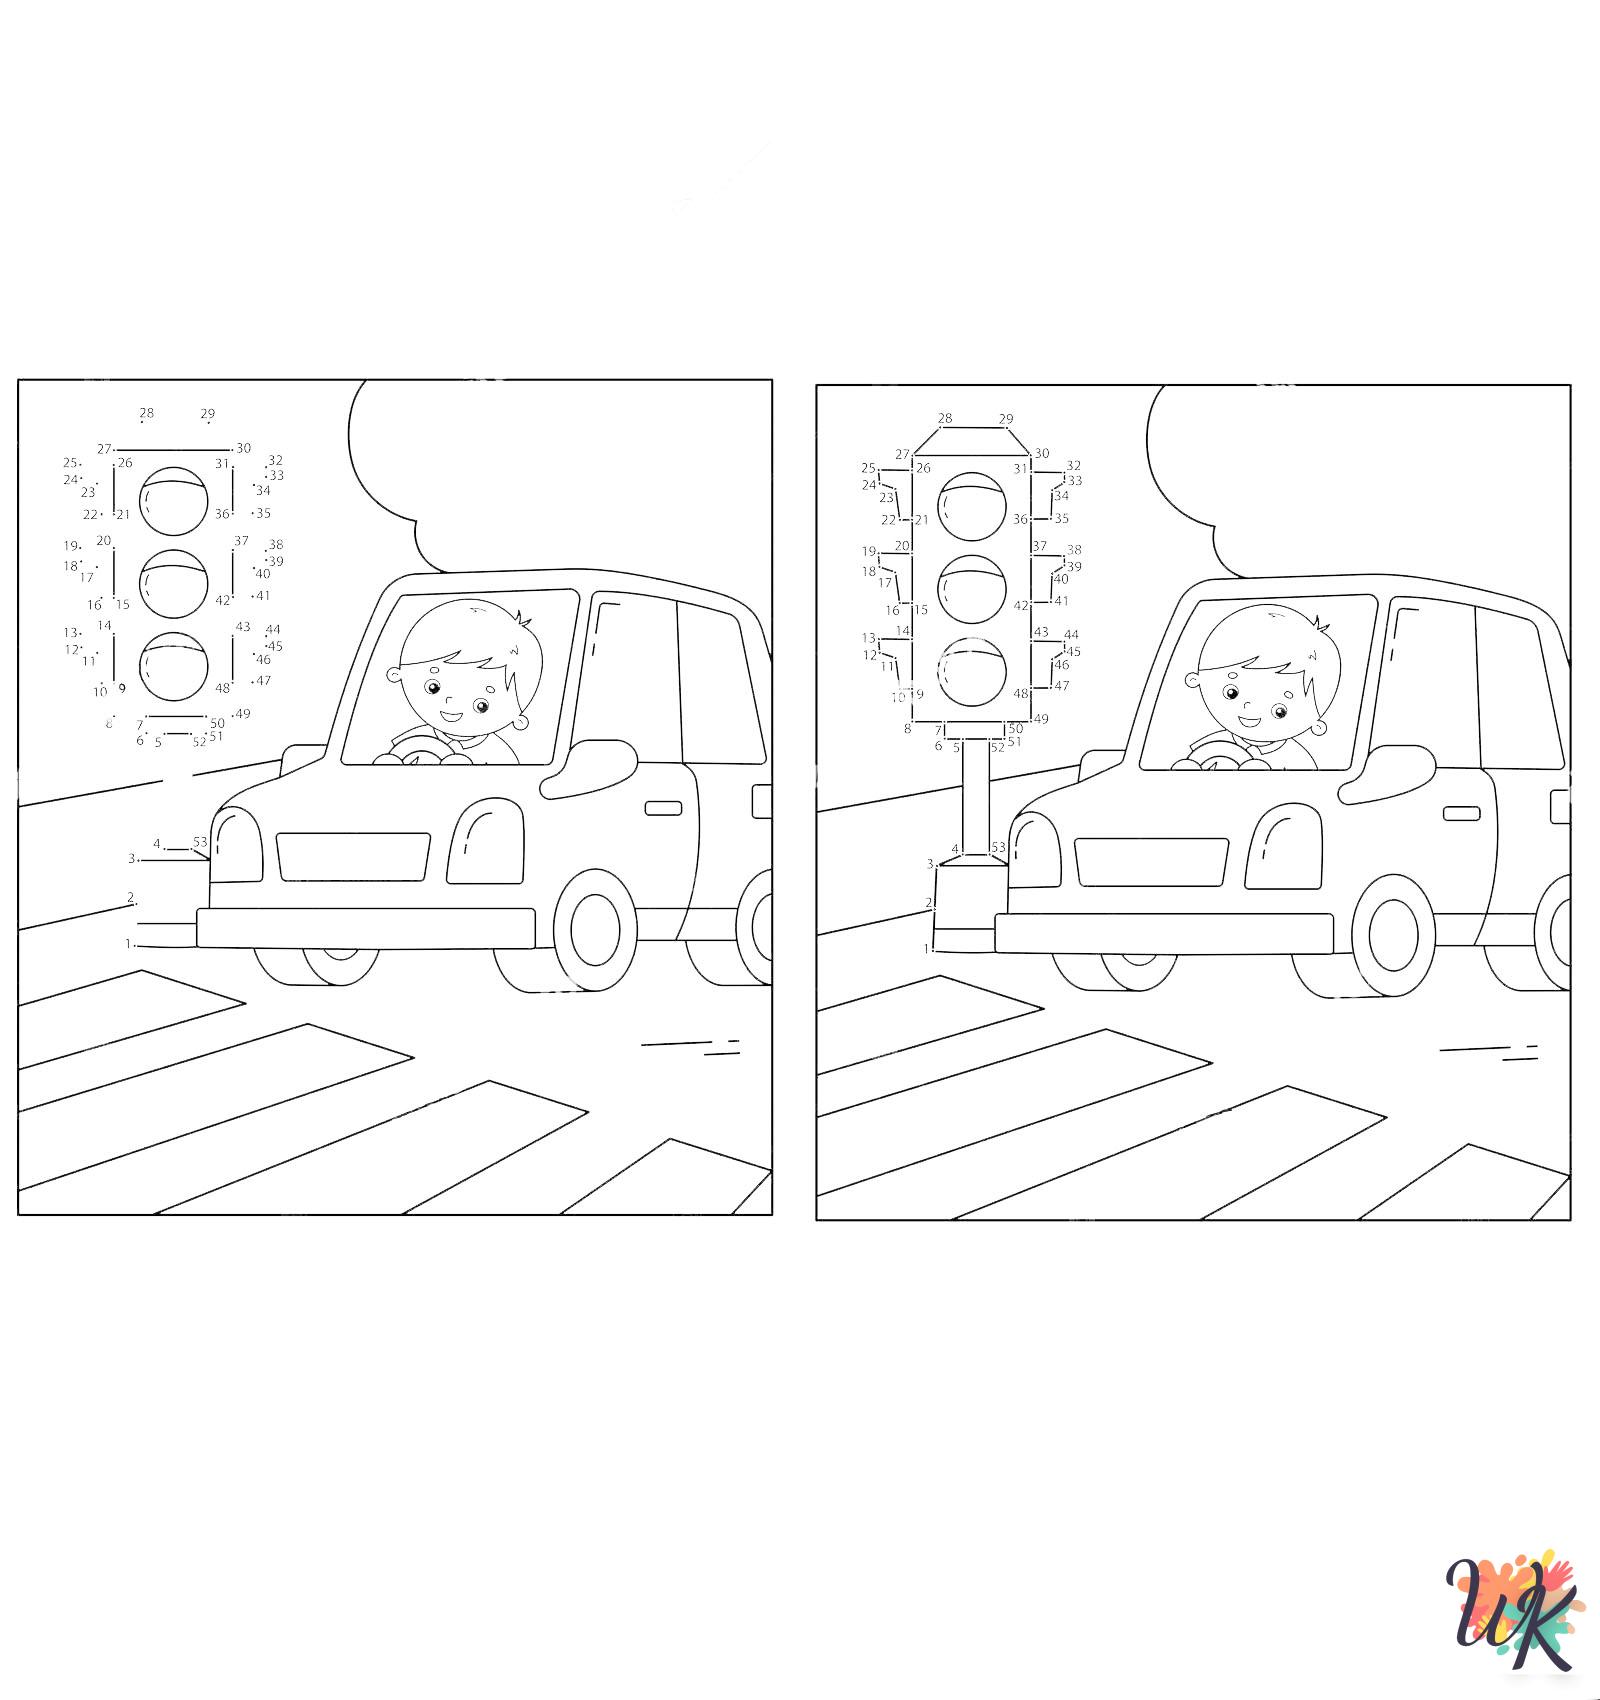 Traffic Light coloring pages printable free